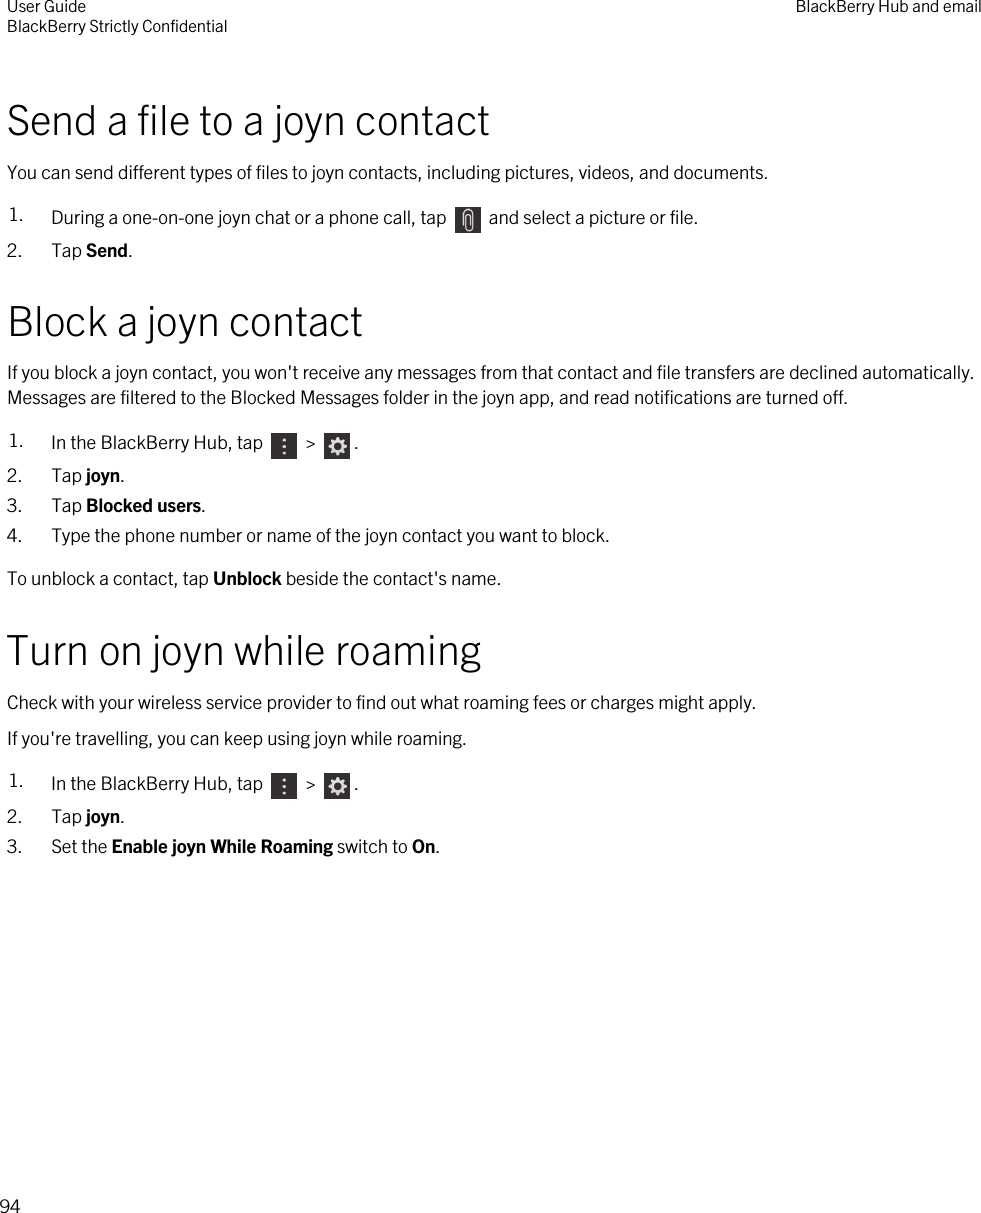 Send a file to a joyn contactYou can send different types of files to joyn contacts, including pictures, videos, and documents.1. During a one-on-one joyn chat or a phone call, tap   and select a picture or file.2. Tap Send.Block a joyn contactIf you block a joyn contact, you won&apos;t receive any messages from that contact and file transfers are declined automatically. Messages are filtered to the Blocked Messages folder in the joyn app, and read notifications are turned off.1. In the BlackBerry Hub, tap   &gt;  . 2. Tap joyn.3. Tap Blocked users.4. Type the phone number or name of the joyn contact you want to block.To unblock a contact, tap Unblock beside the contact&apos;s name.Turn on joyn while roamingCheck with your wireless service provider to find out what roaming fees or charges might apply.If you&apos;re travelling, you can keep using joyn while roaming.1. In the BlackBerry Hub, tap   &gt;  .2. Tap joyn.3. Set the Enable joyn While Roaming switch to On.User GuideBlackBerry Strictly Confidential BlackBerry Hub and email94